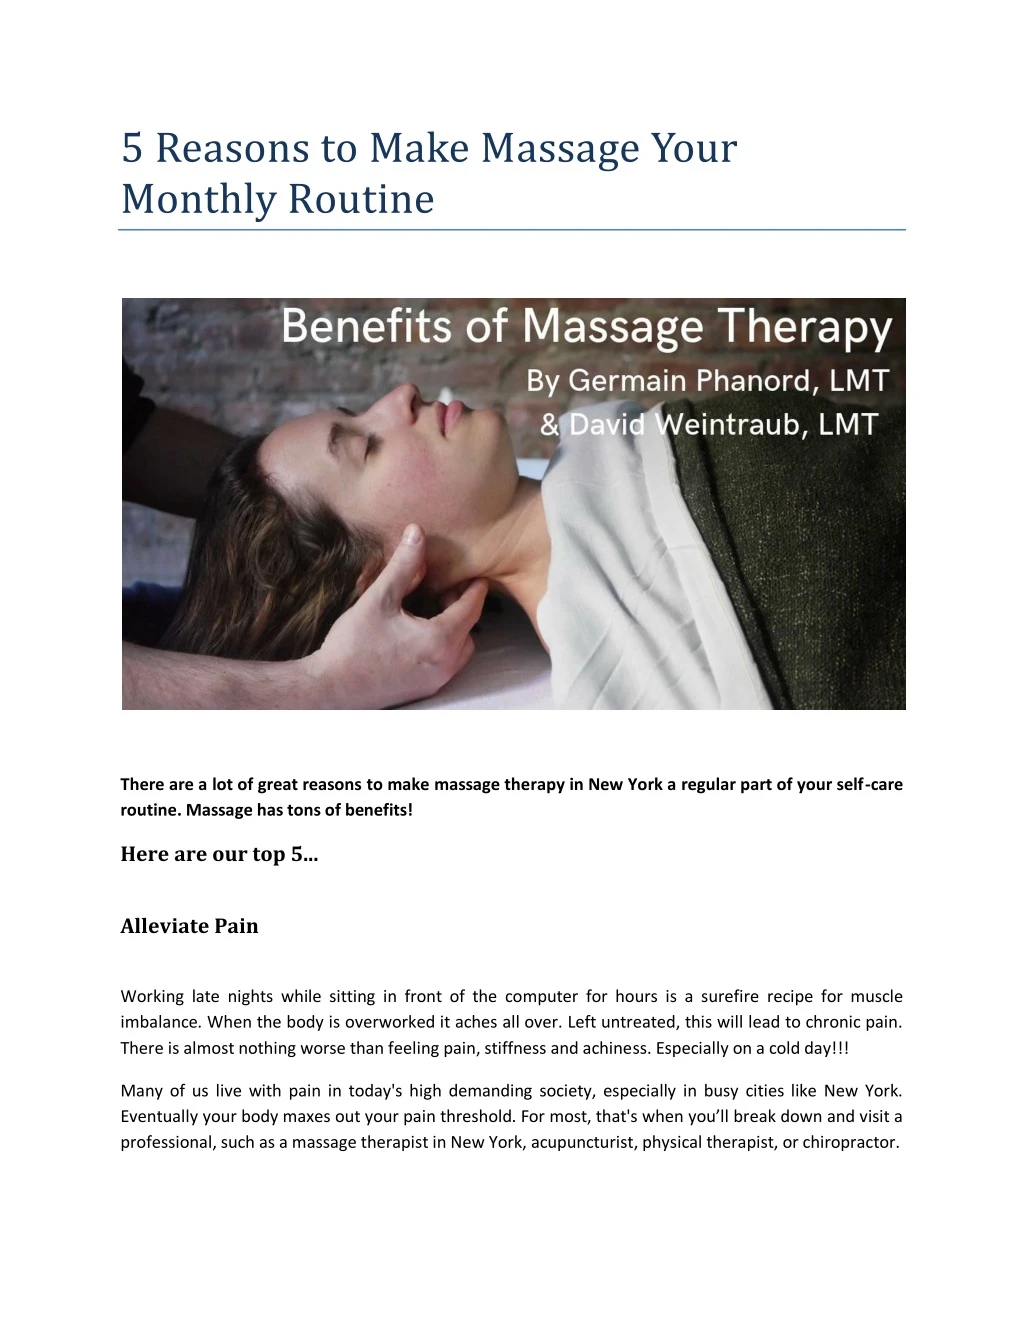 5 reasons to make massage your monthly routine